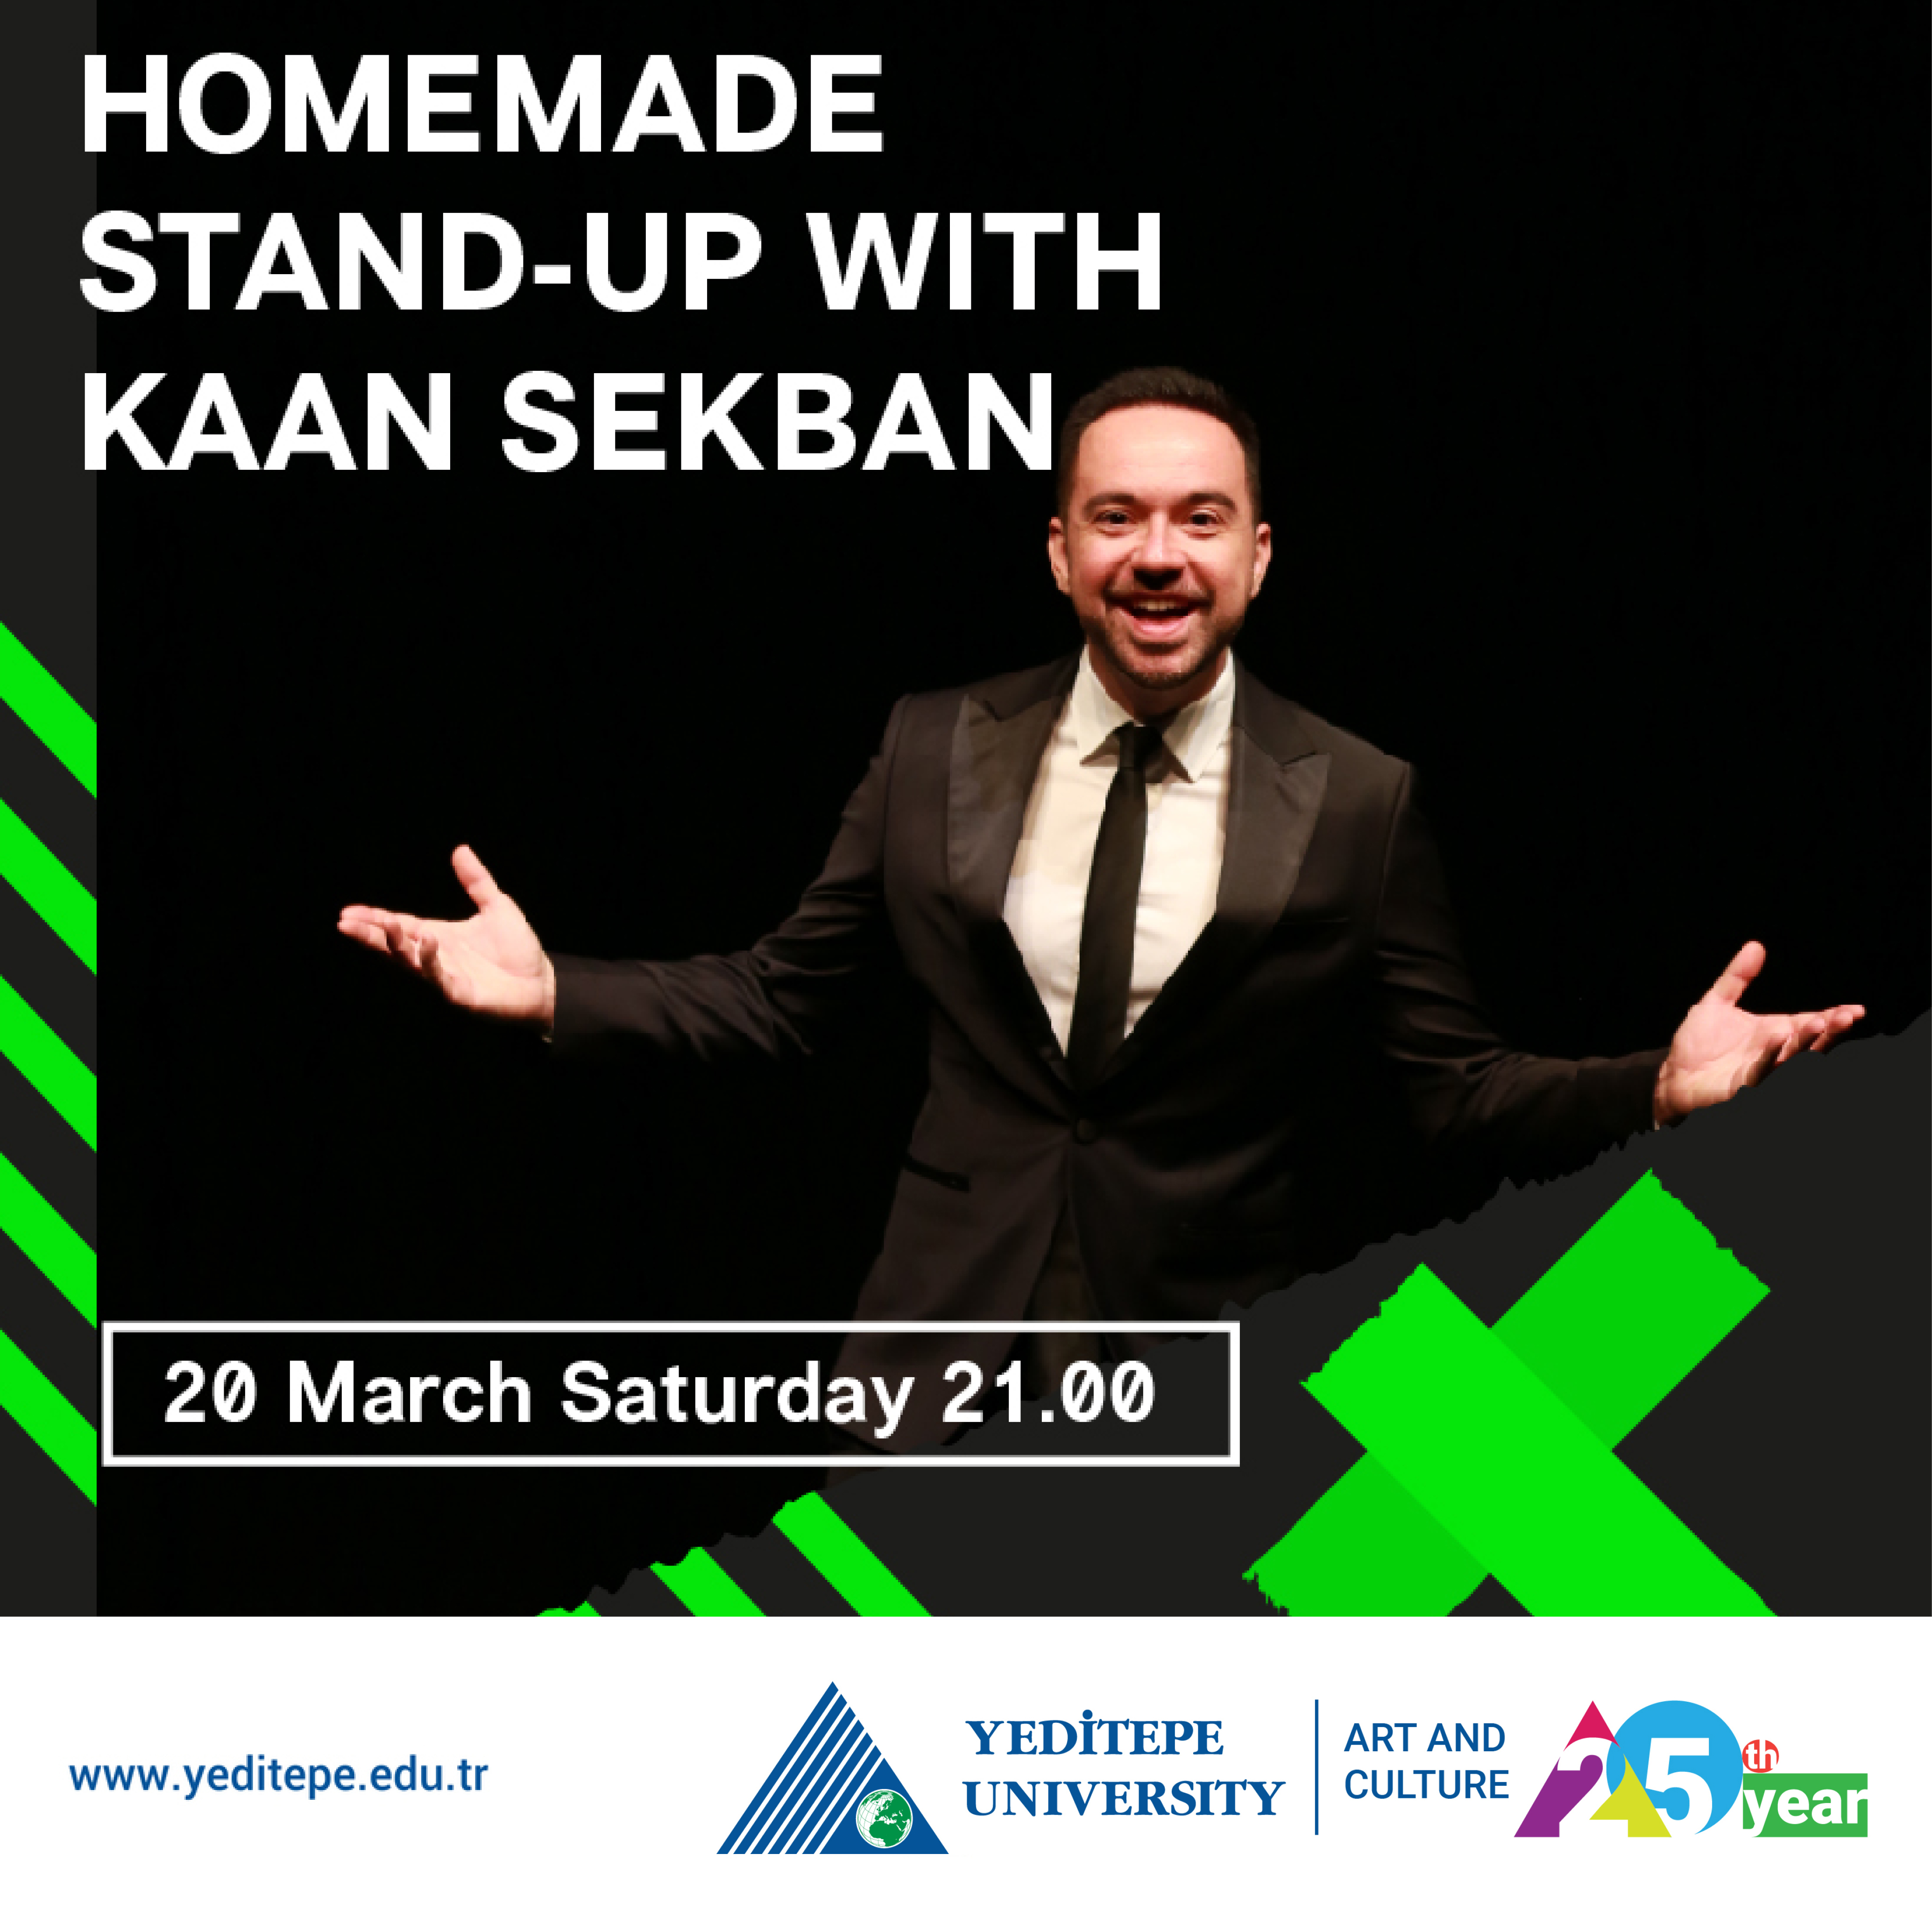 Homemade Stand-Up With Kaan Sekban